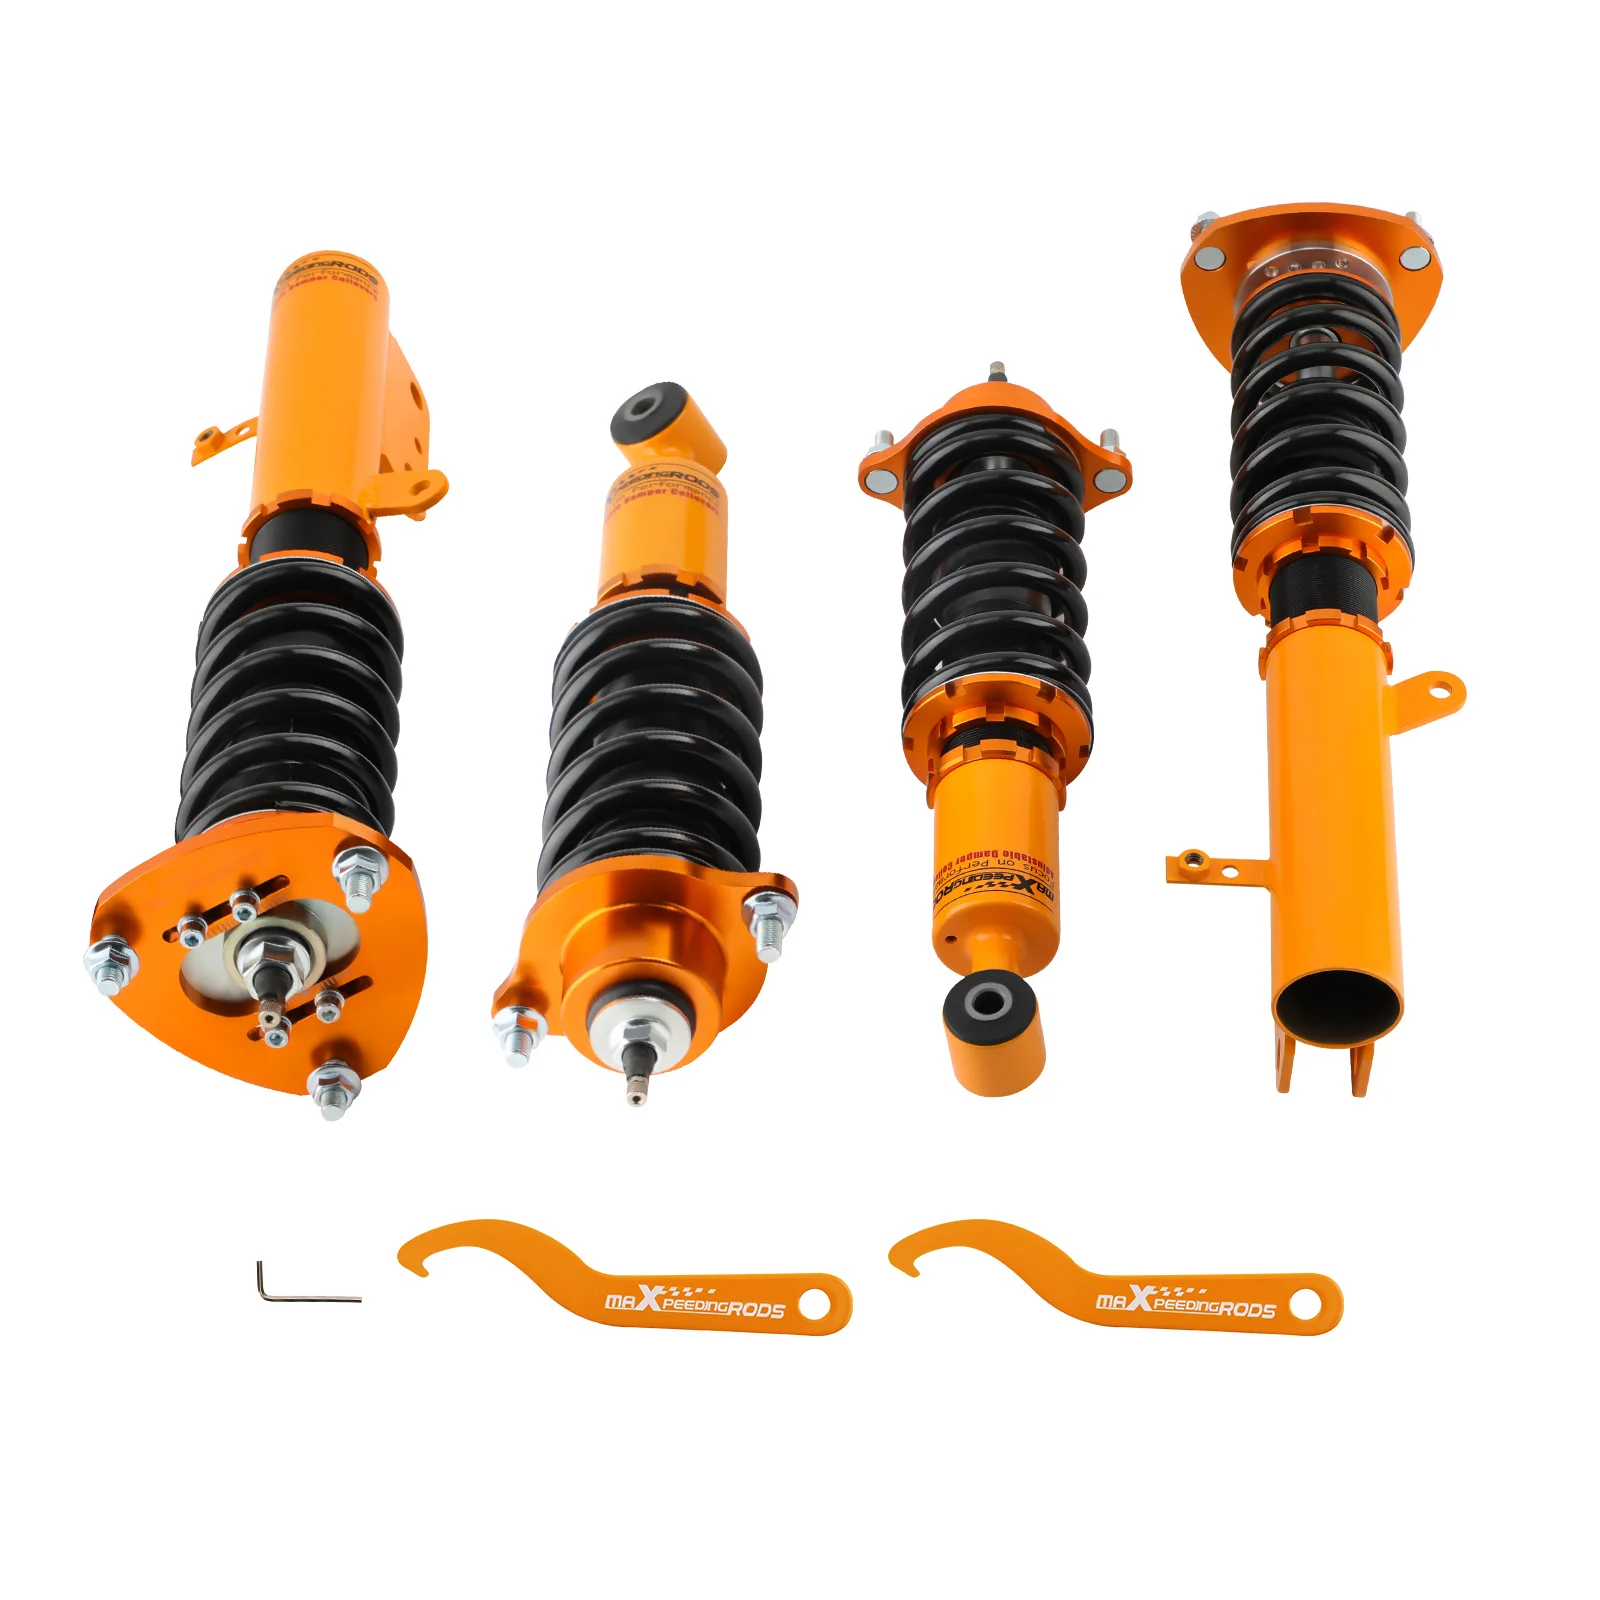 

Coilover Suspension Kit For Dodge Caliber 07-2012, Jeep Compass/ Patriot 07-2010 Shock Absorbers Struts Adjustable Height